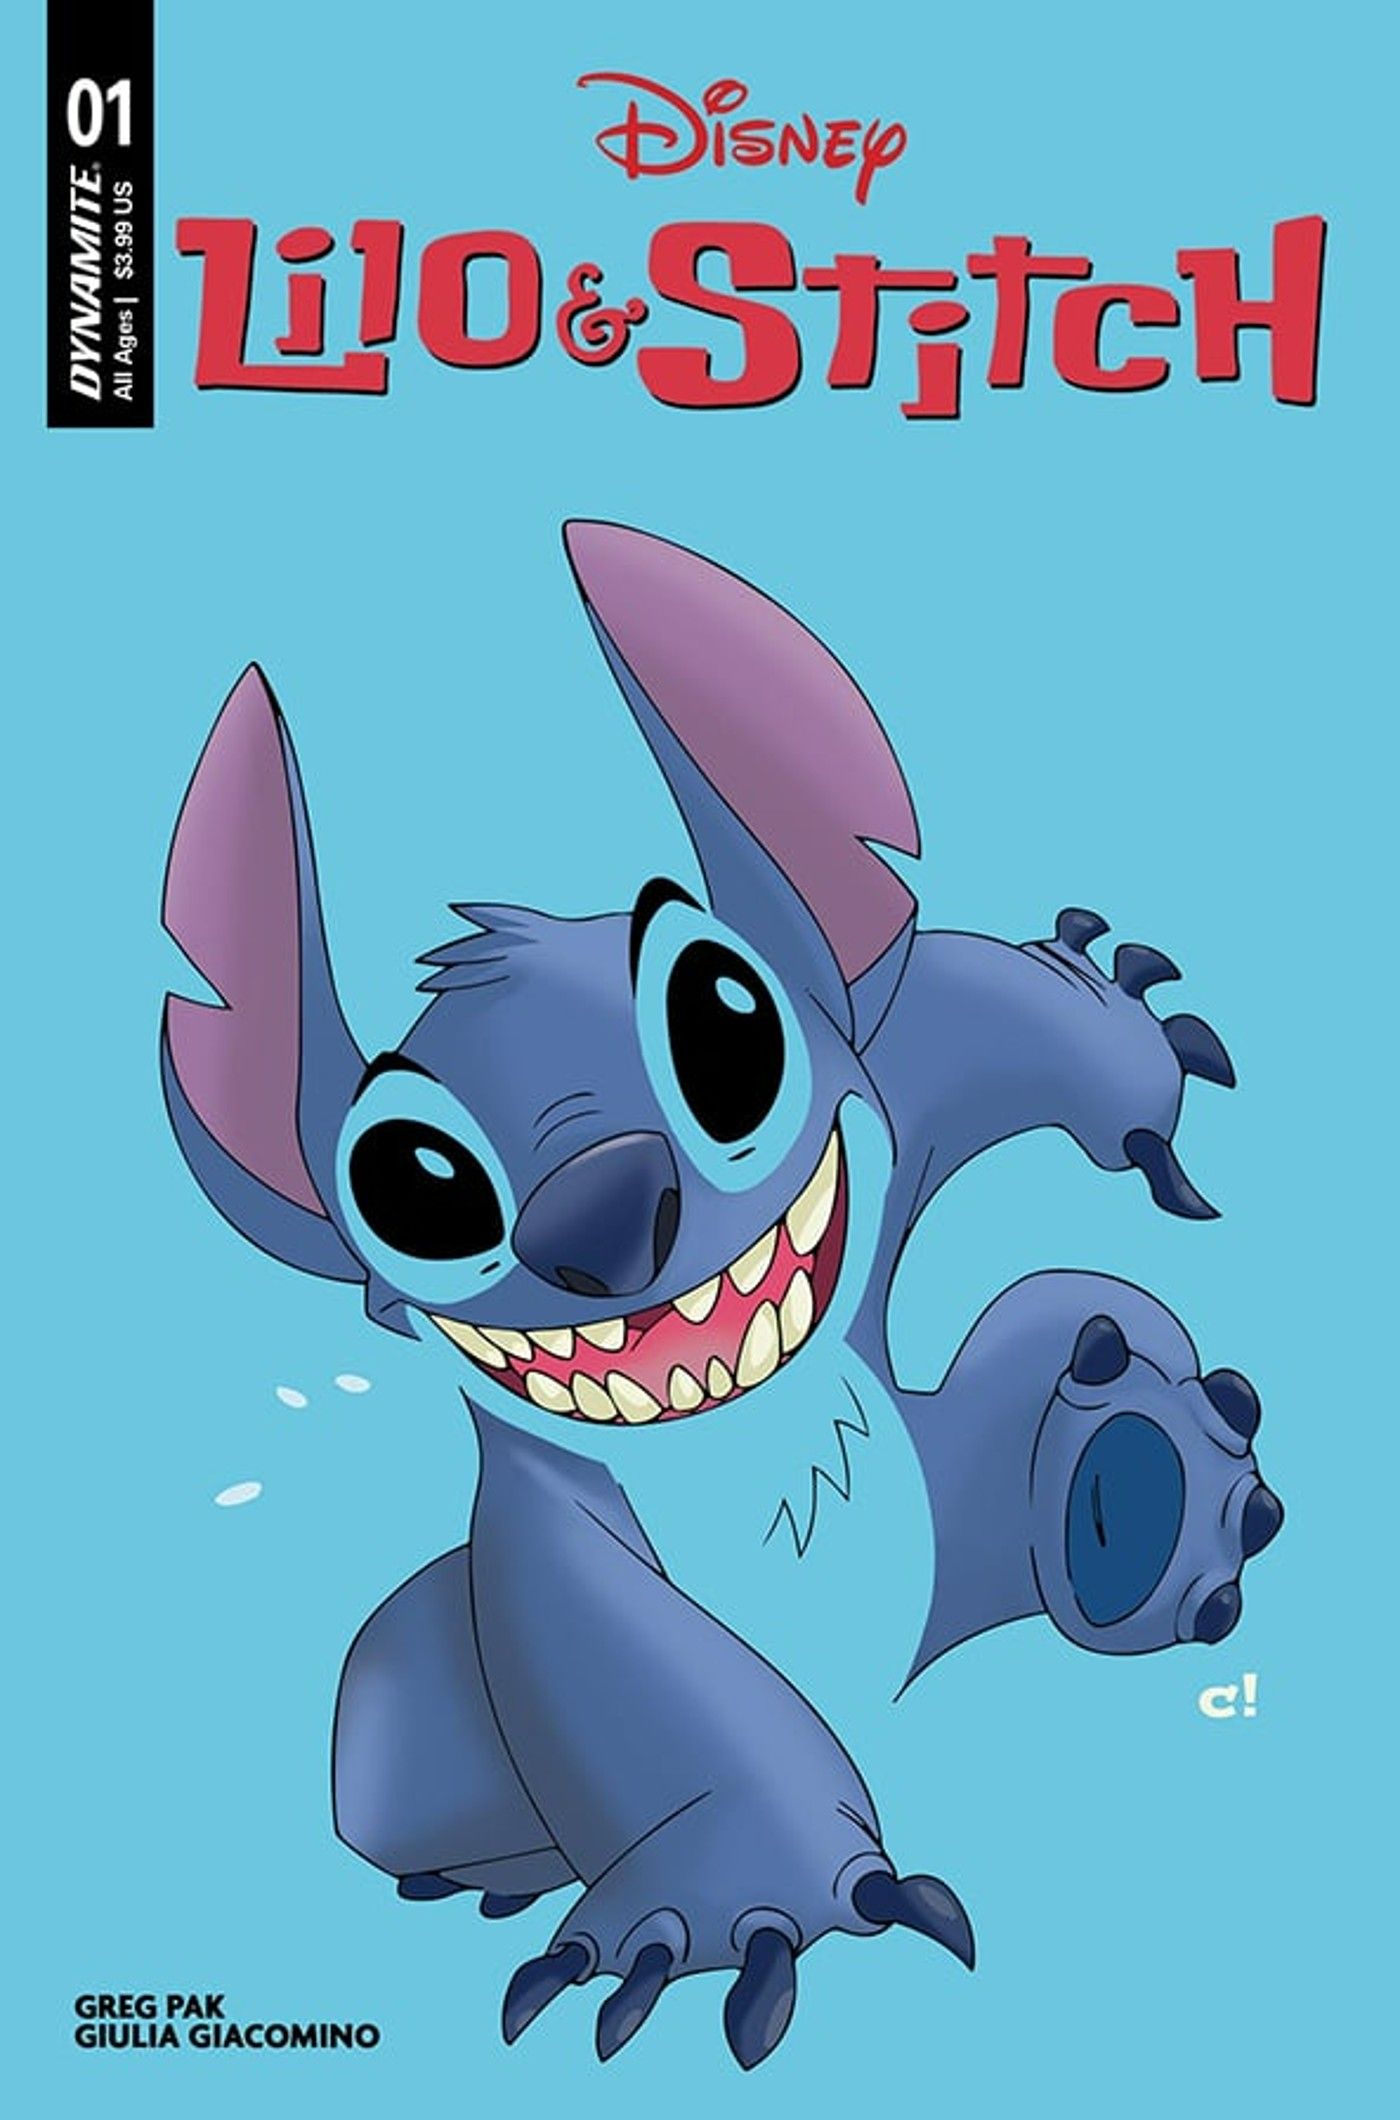 Cover of Lilo & Stitch #1 by Rousseau, Stitch solo